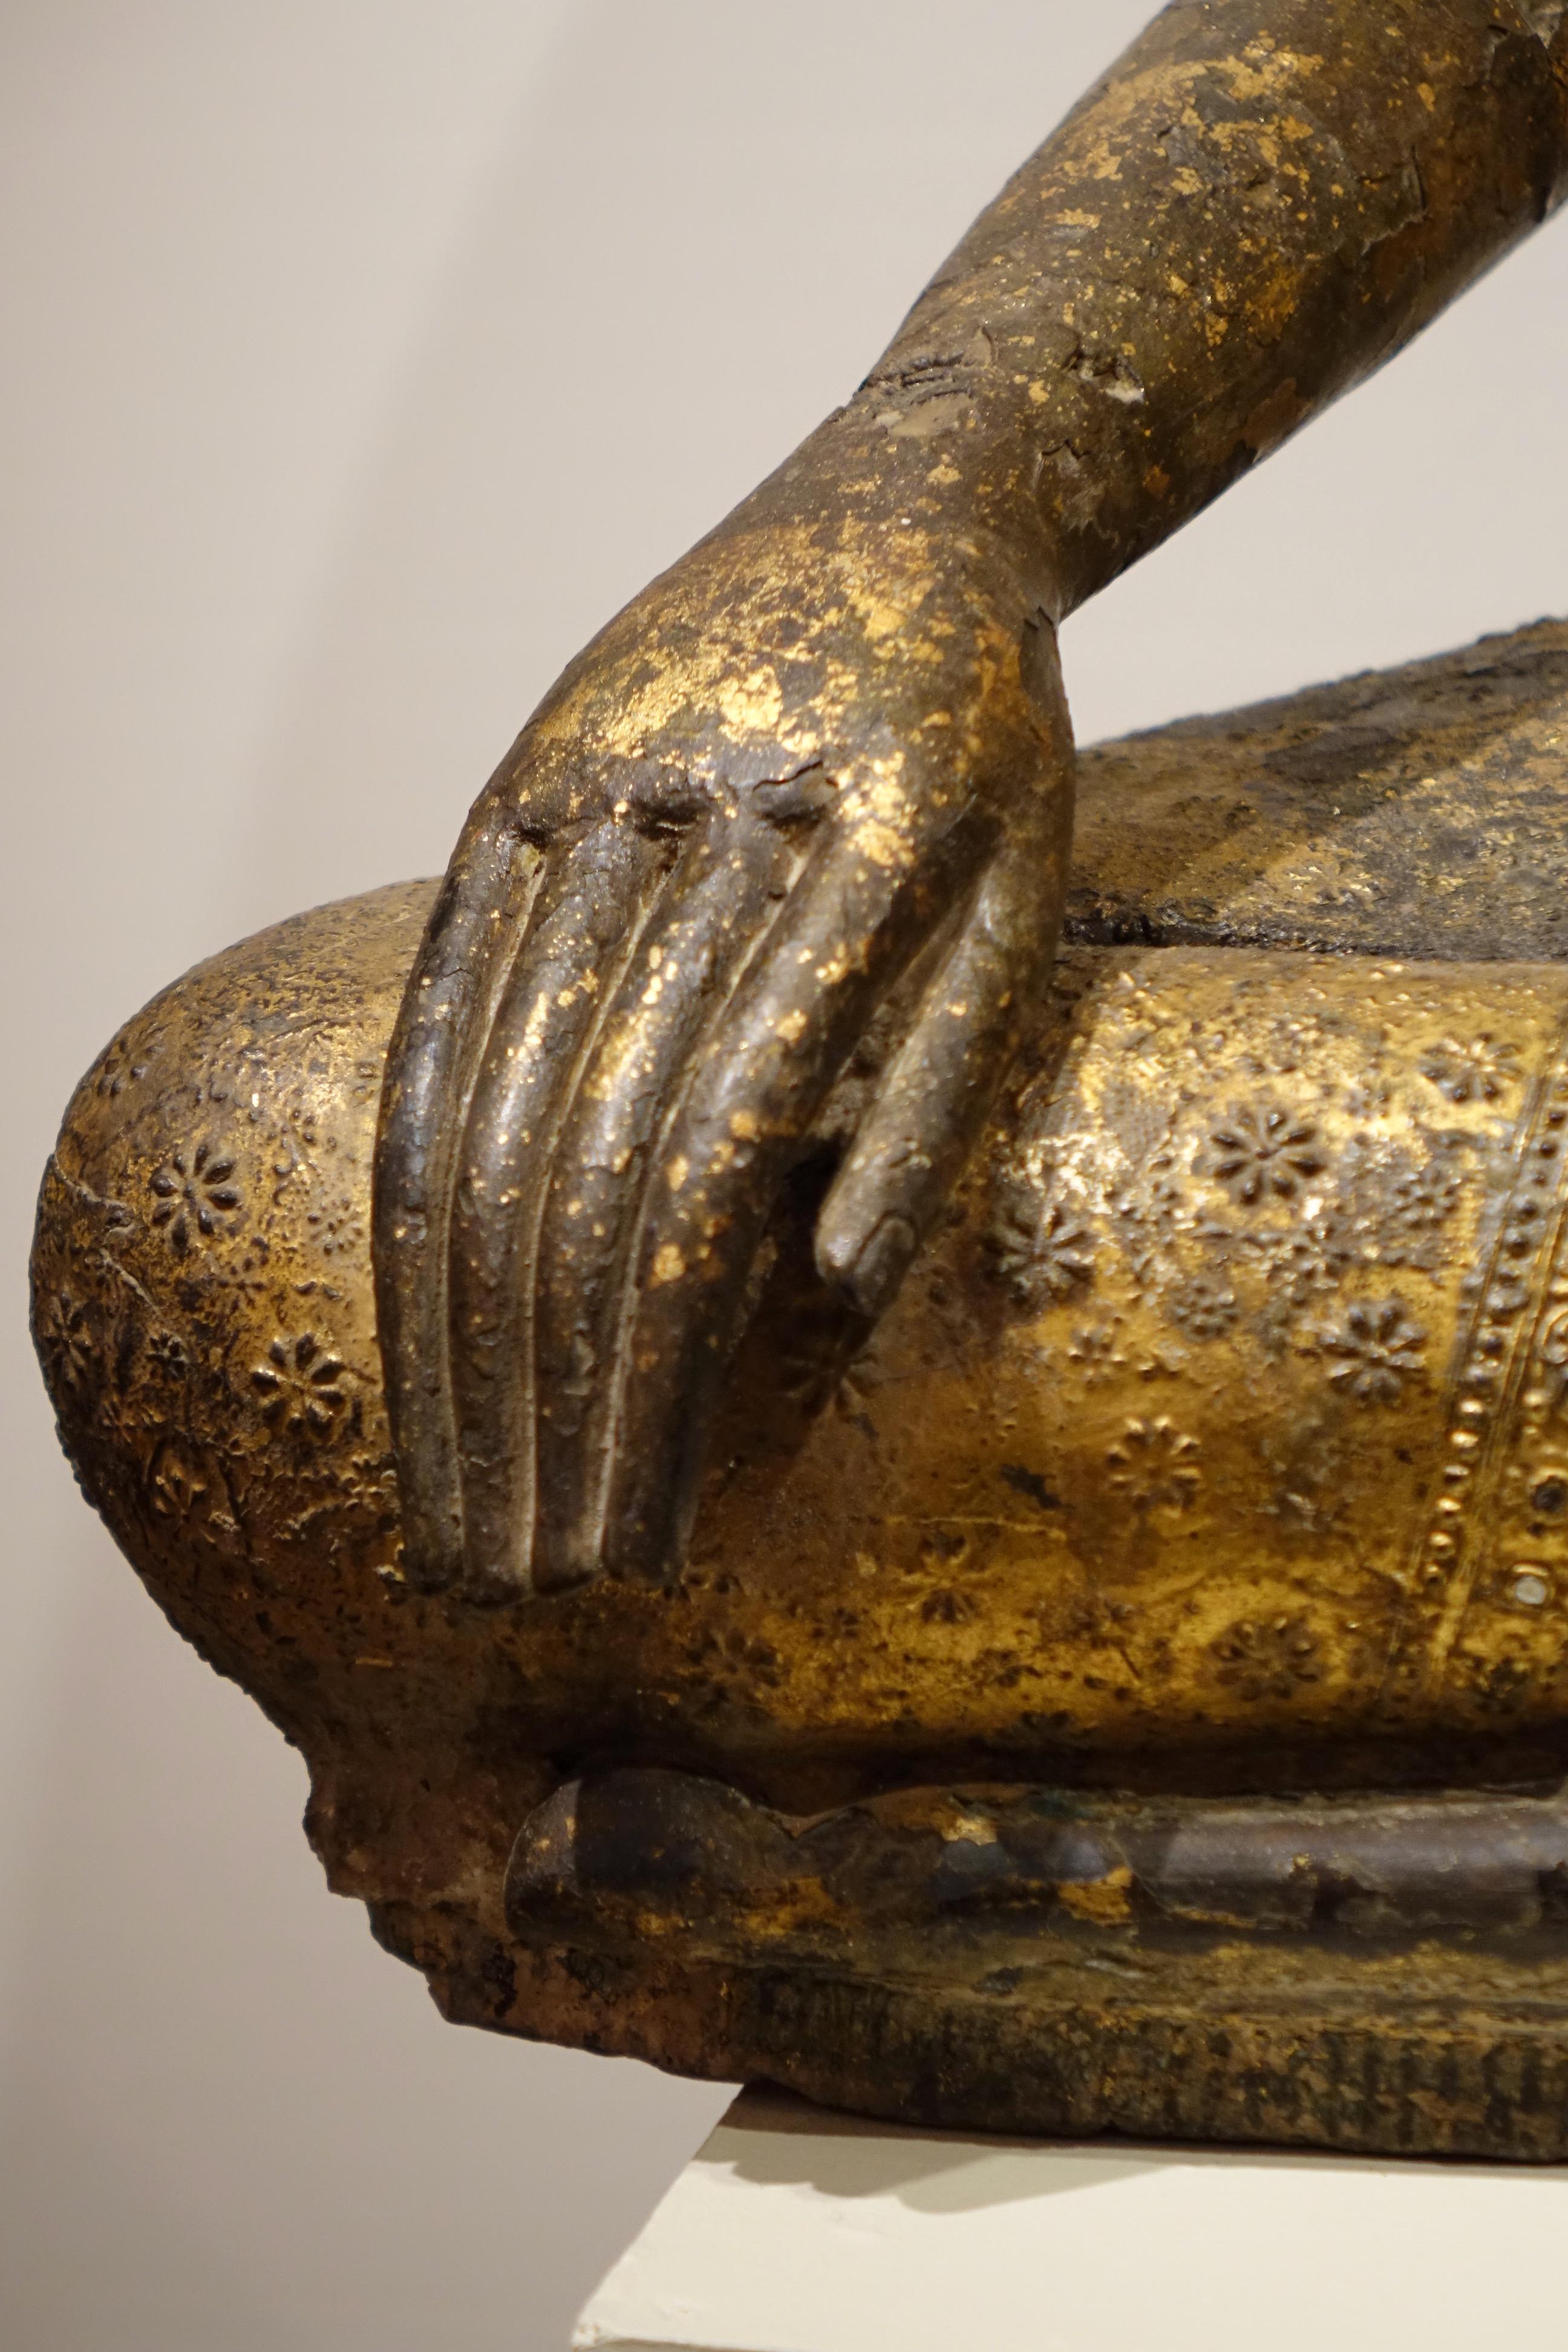 A sitting Buddha in lacquered and gilt bronze, in the position of the earth touching gesture. (Bhumisparsa mùdra).
This attitude represents Buddha's Enlightenment. It holds a very great place in Thai imaginary, because it symbolizes the victory